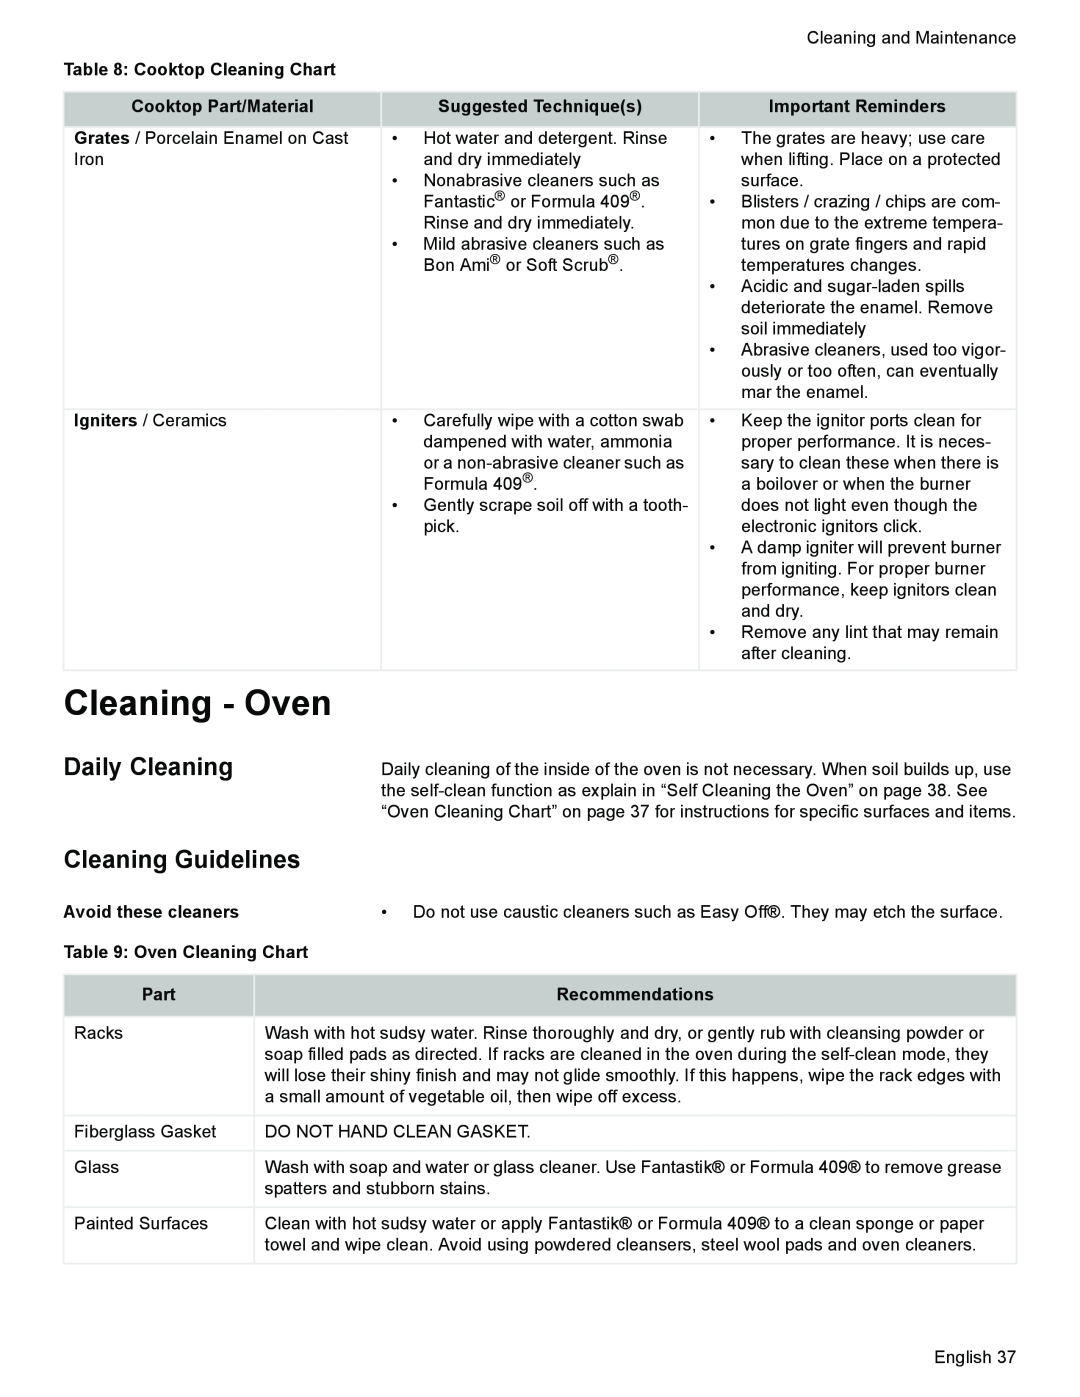 Siemens HG2425UC manual Cleaning - Oven, Avoid these cleaners, Oven Cleaning Chart, Part, Recommendations, Daily Cleaning 